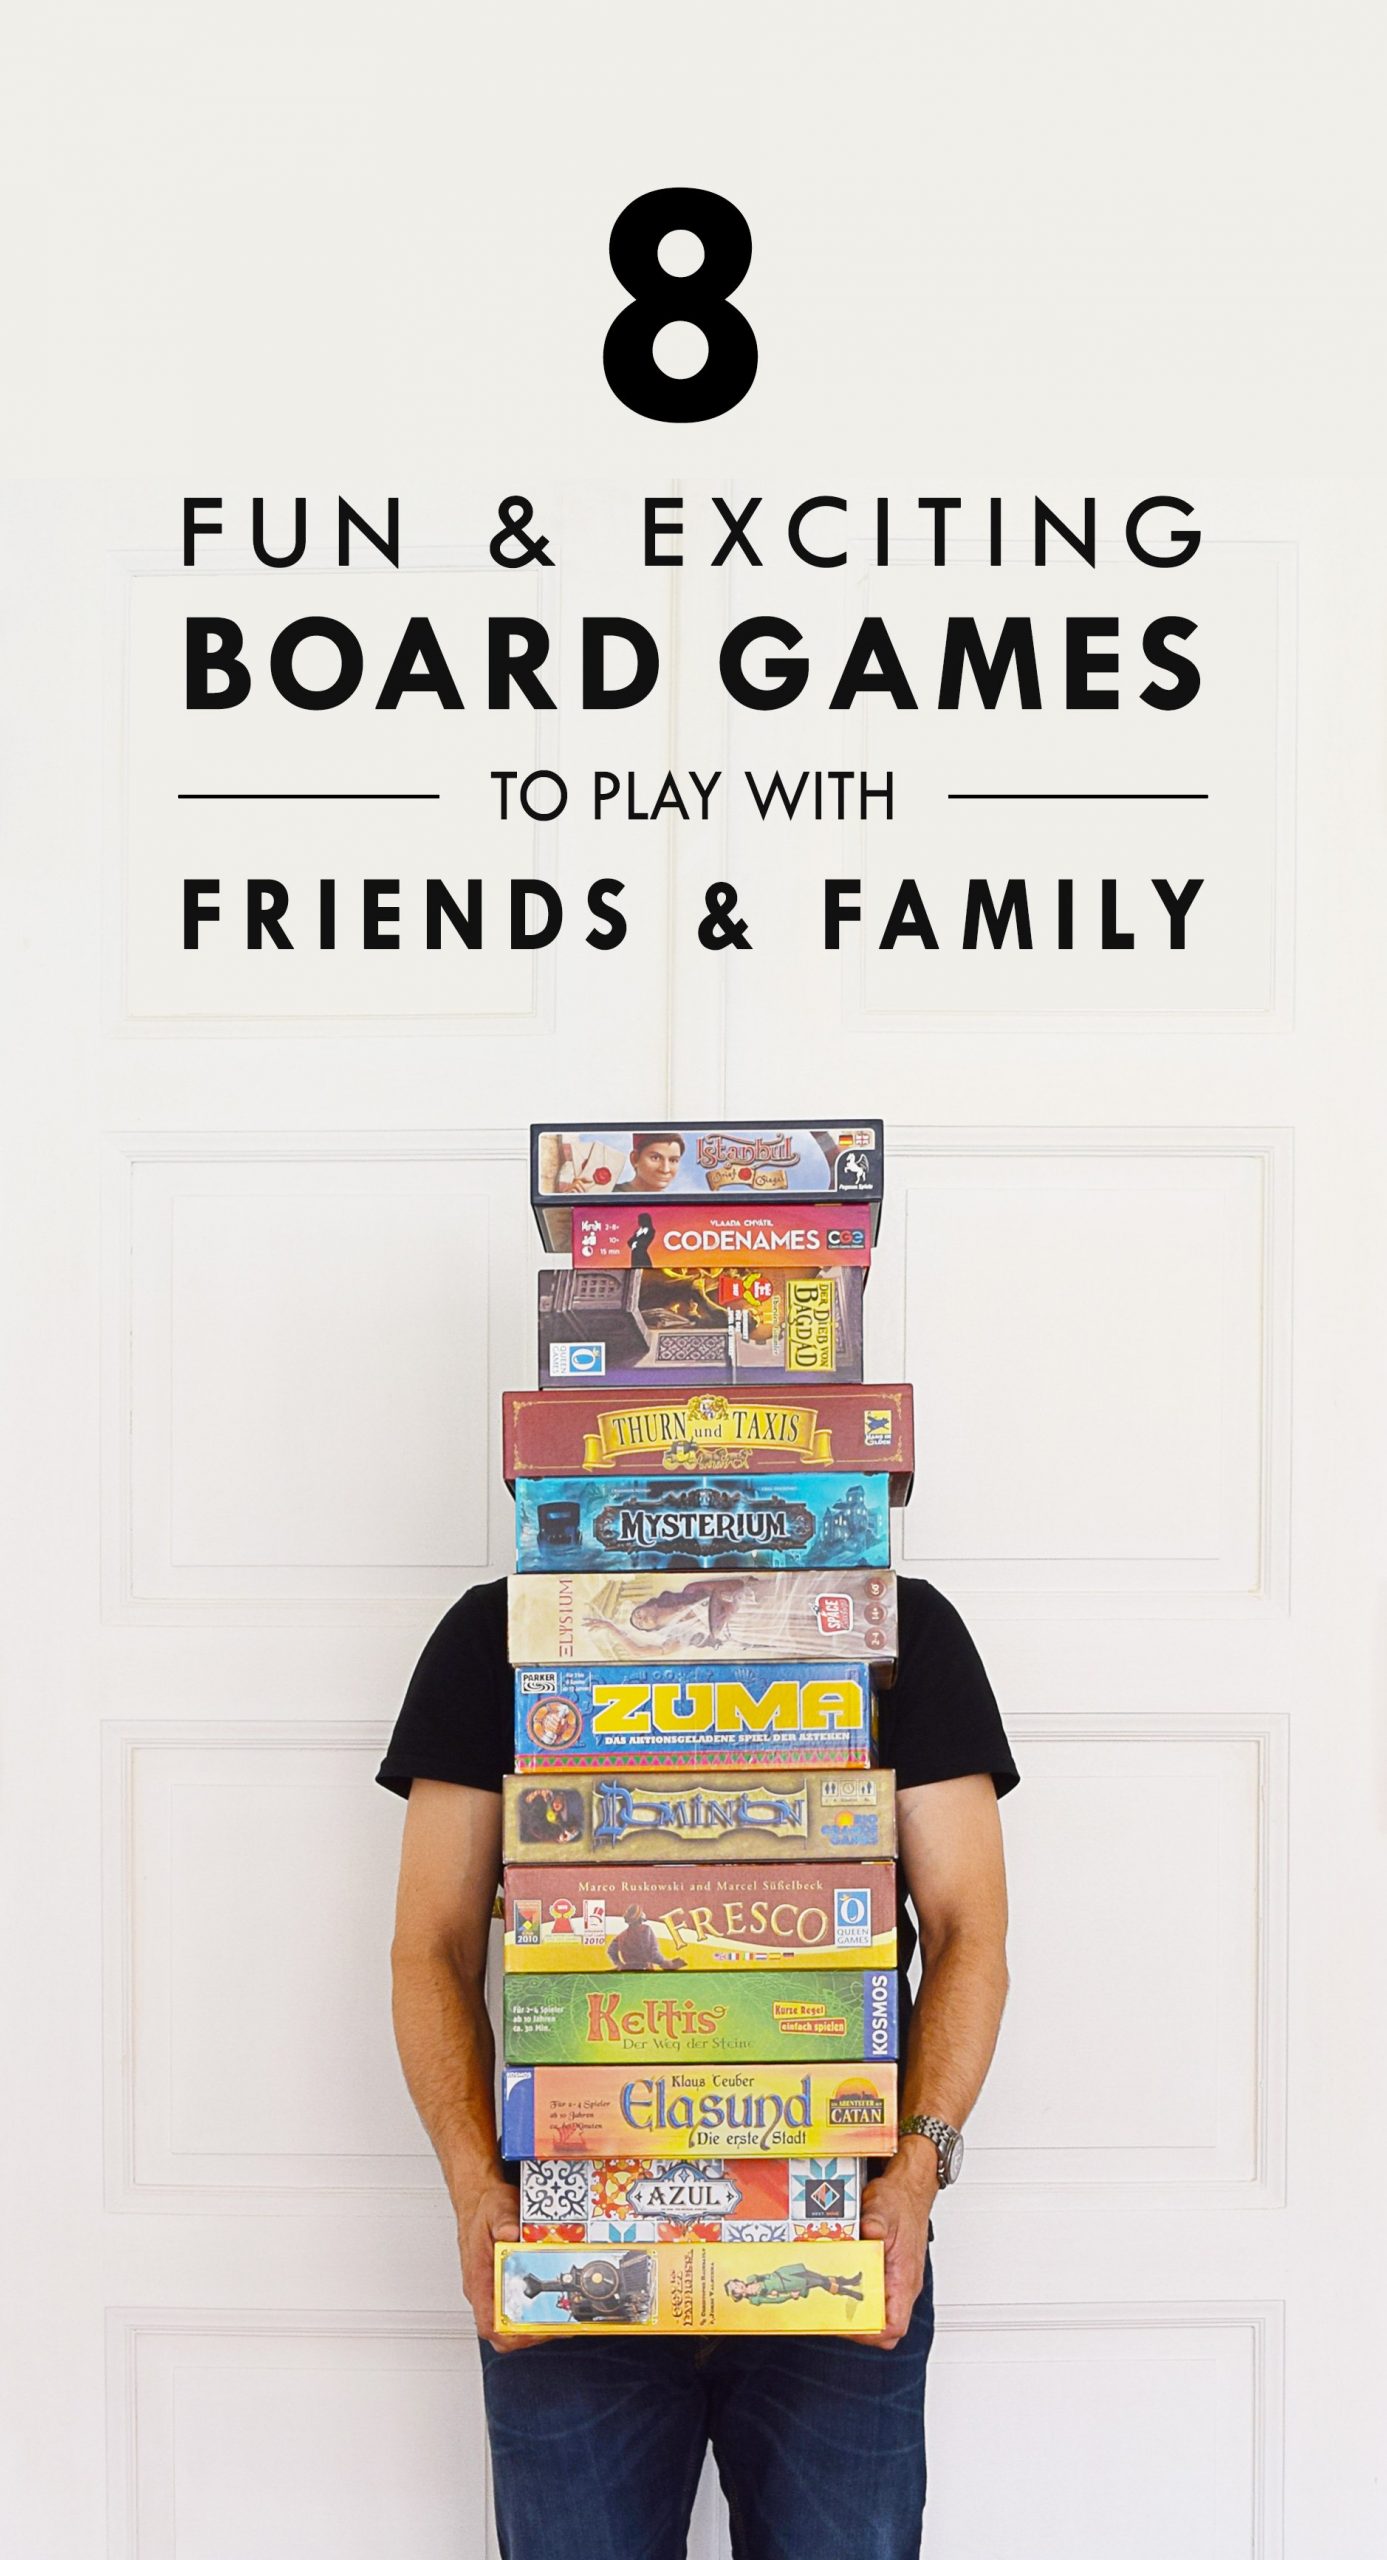 Any good, free online sites to play boardgames with friends that